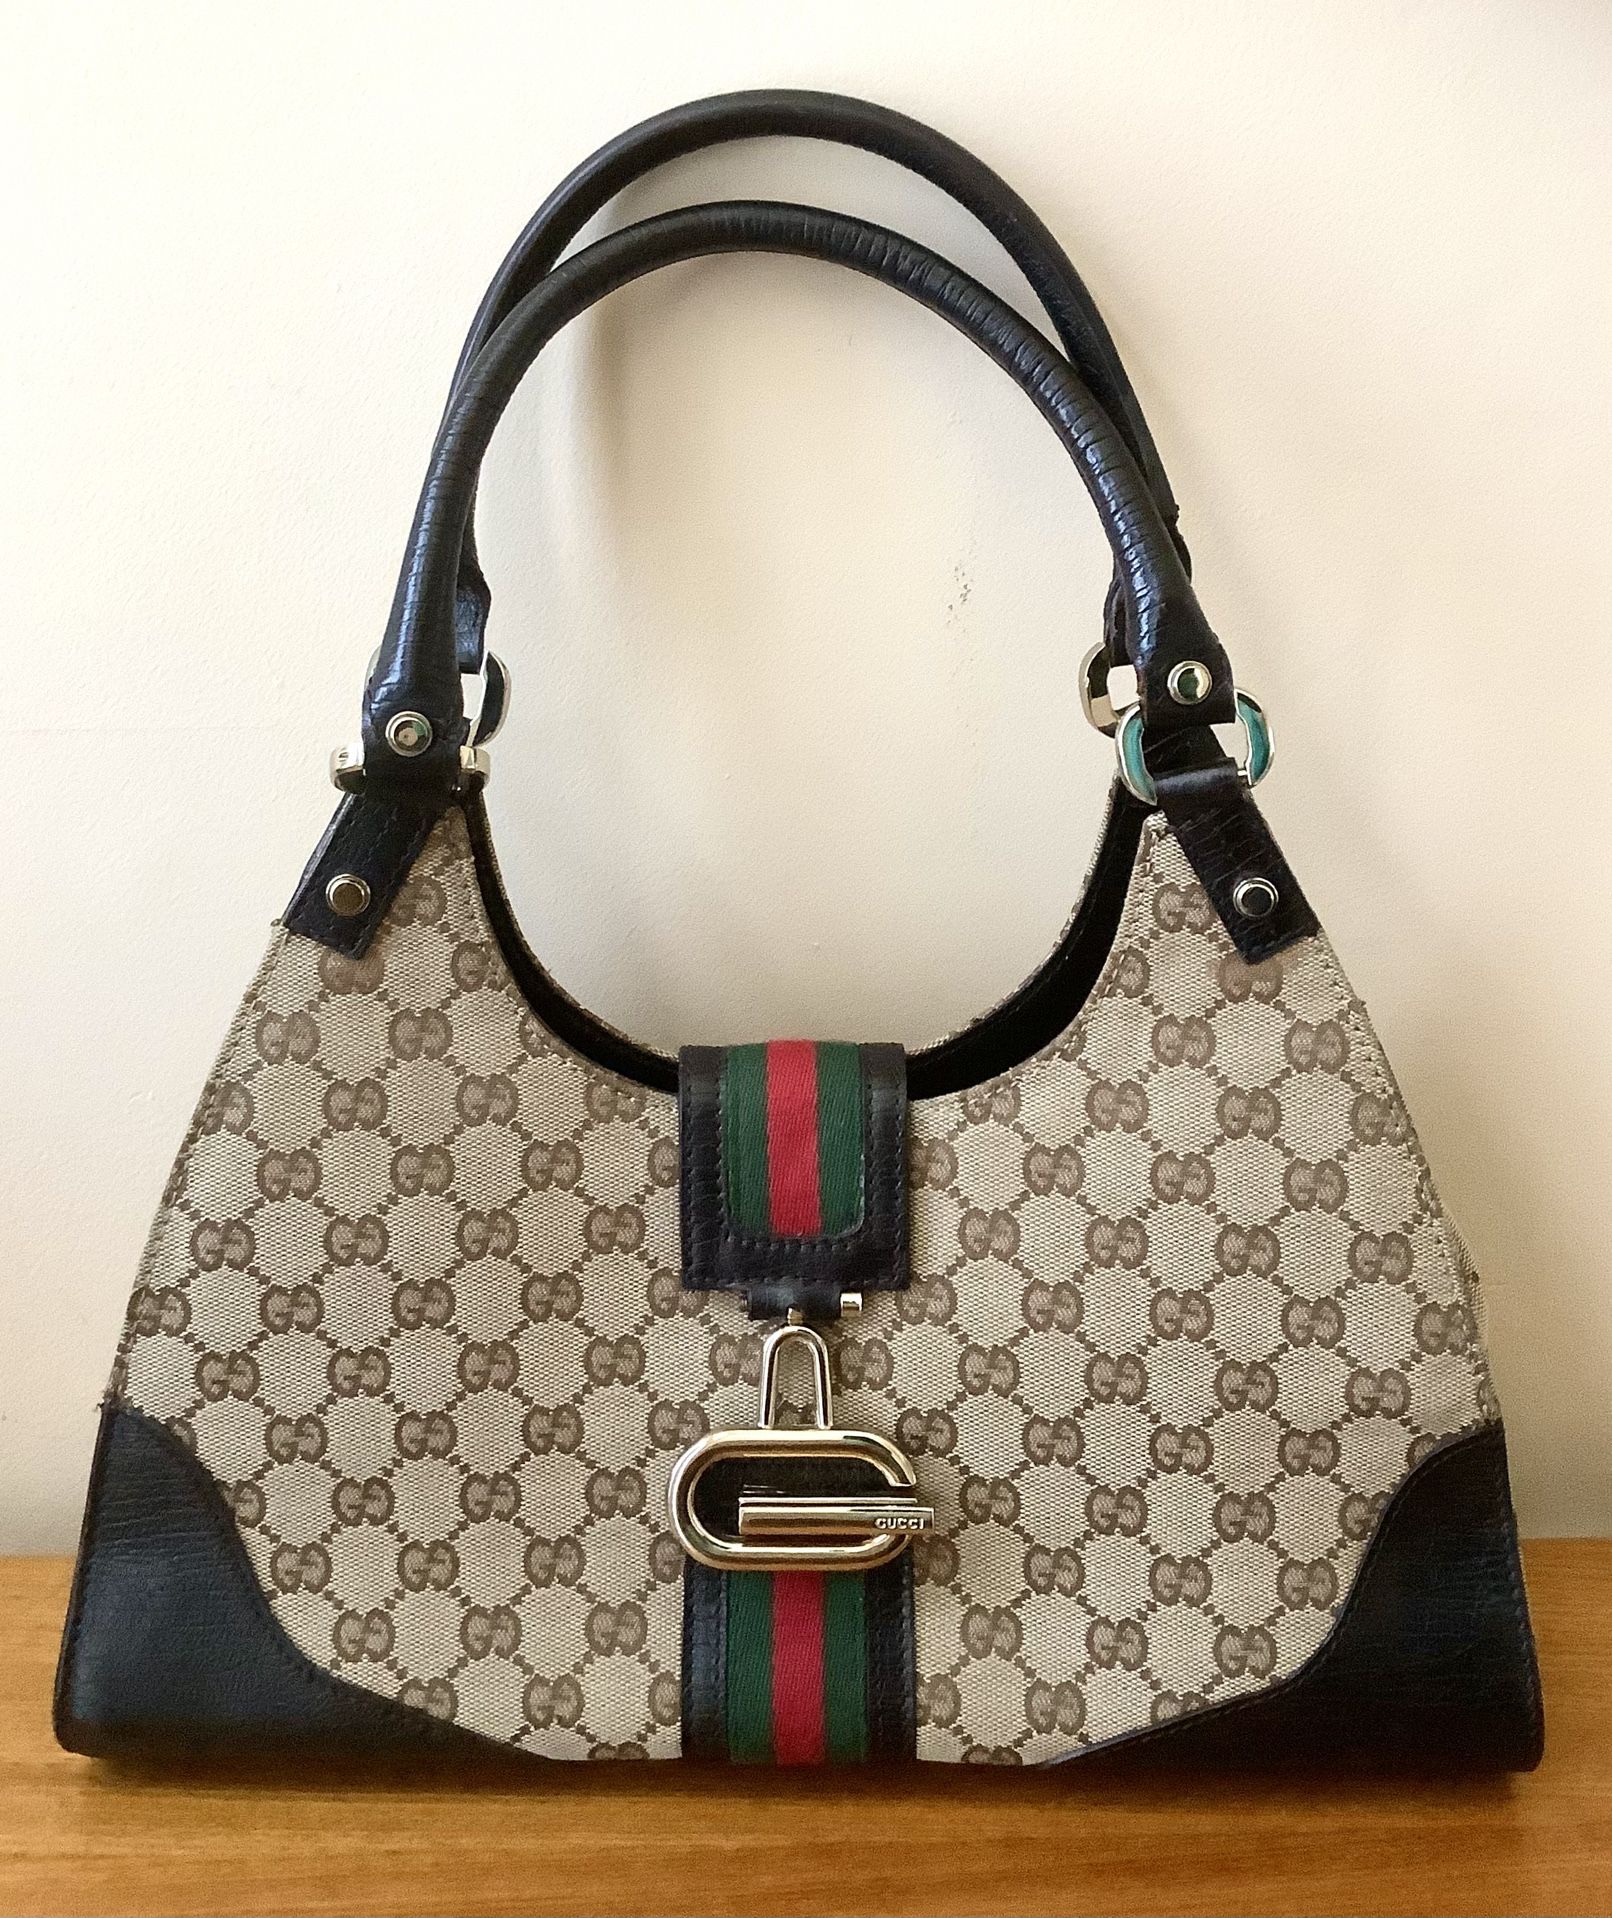 🌹VTG GUCCI OPHIDIA HOBO SHERRY FABRIC & LEATHER GOLD HARDWARE HAND BAG 🇮🇹